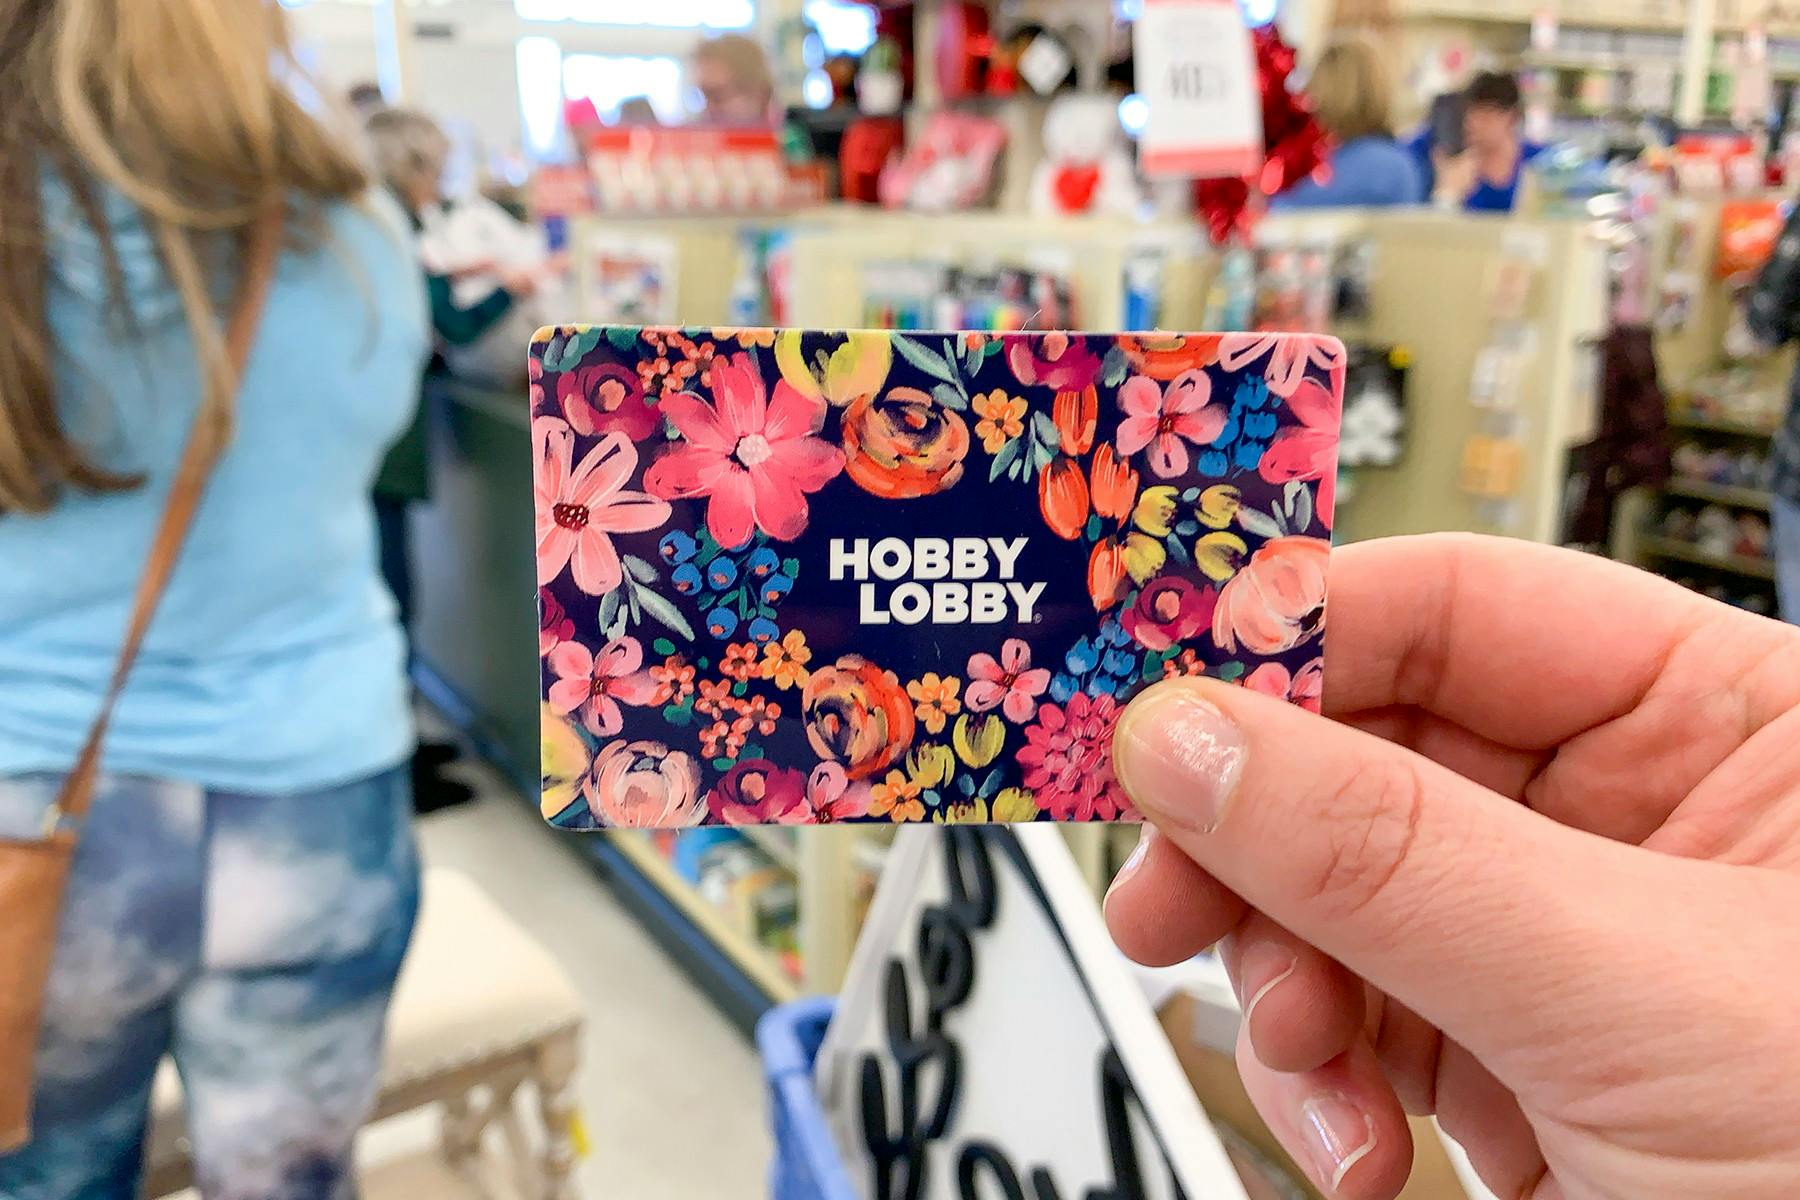 Use These Hobby Lobby Coupon Hacks to Save More Money